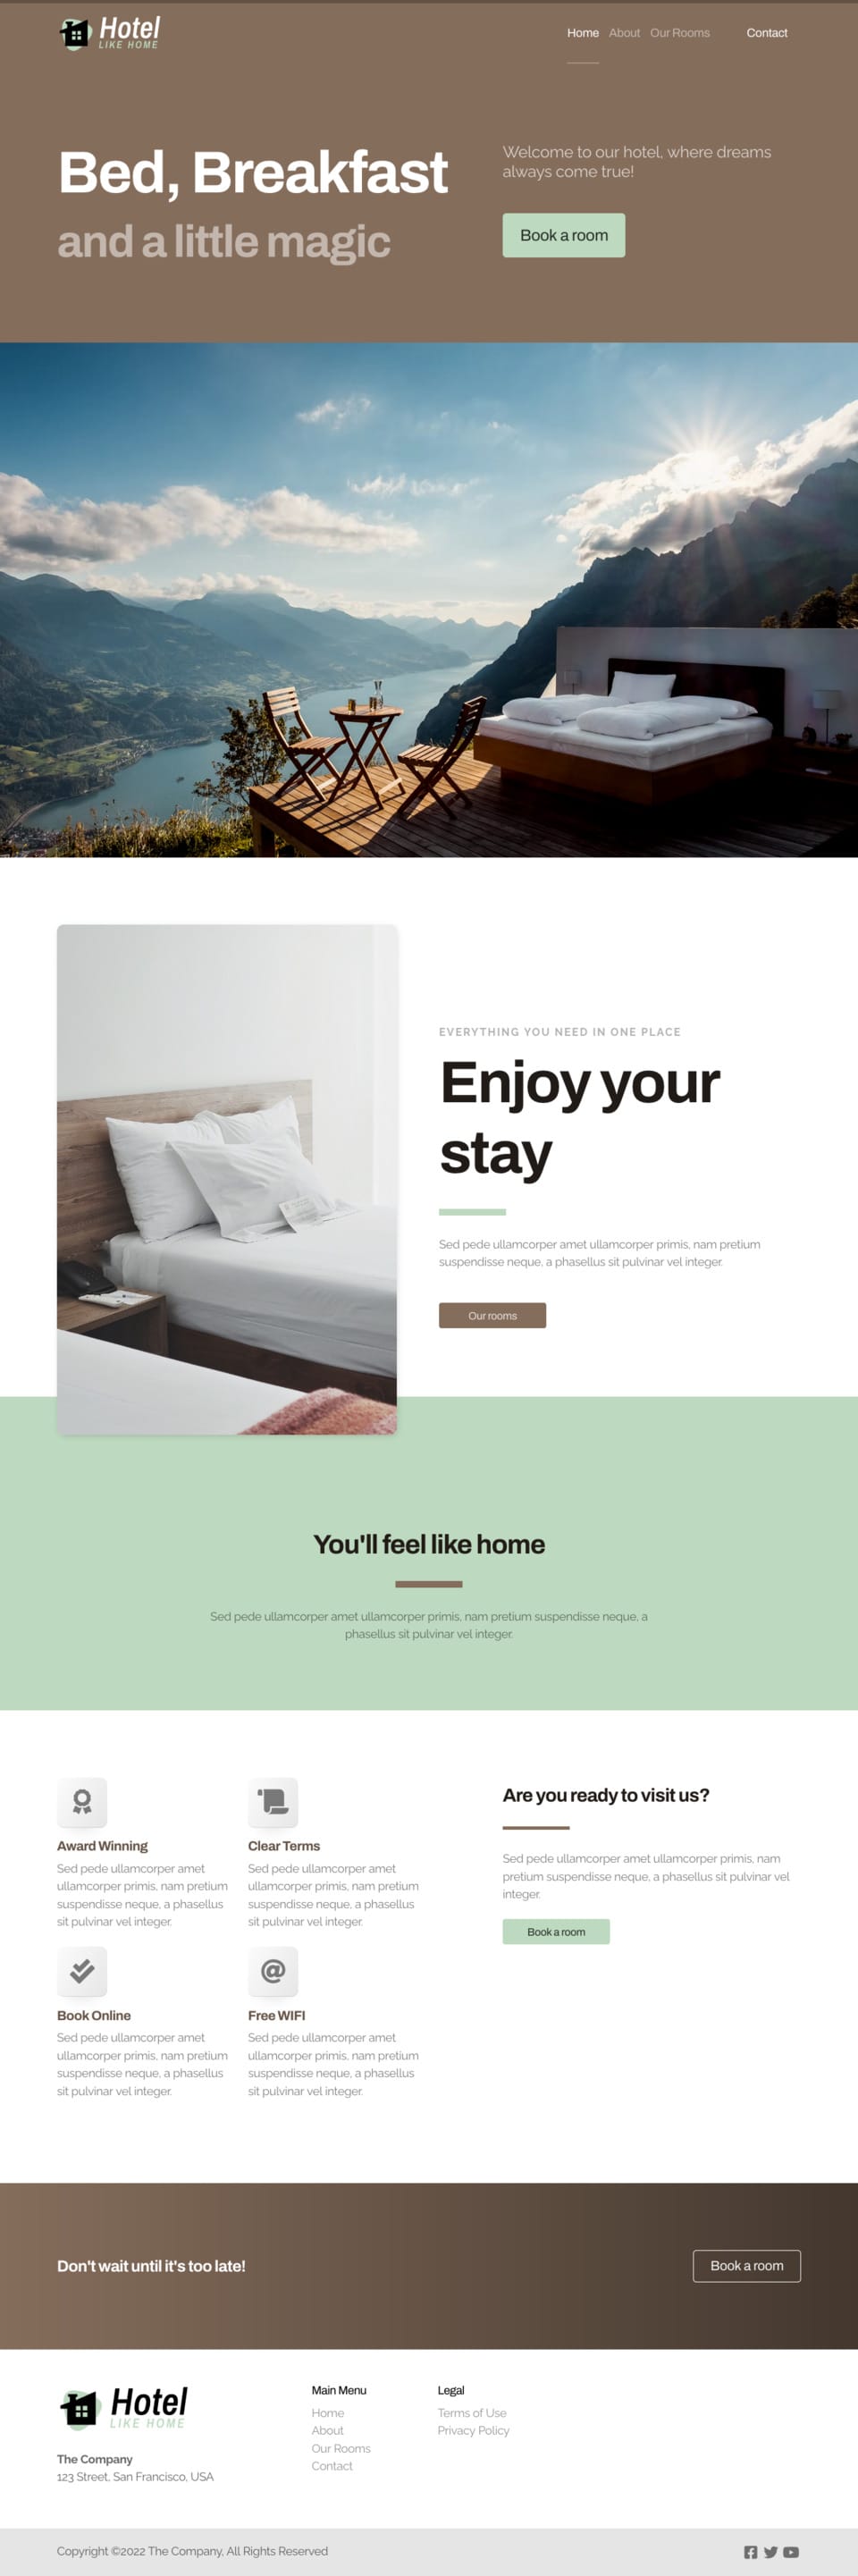 Hotel Website Template - Ideal for hotels, vacation rentals, travel agencies, bed and breakfasts, and more.